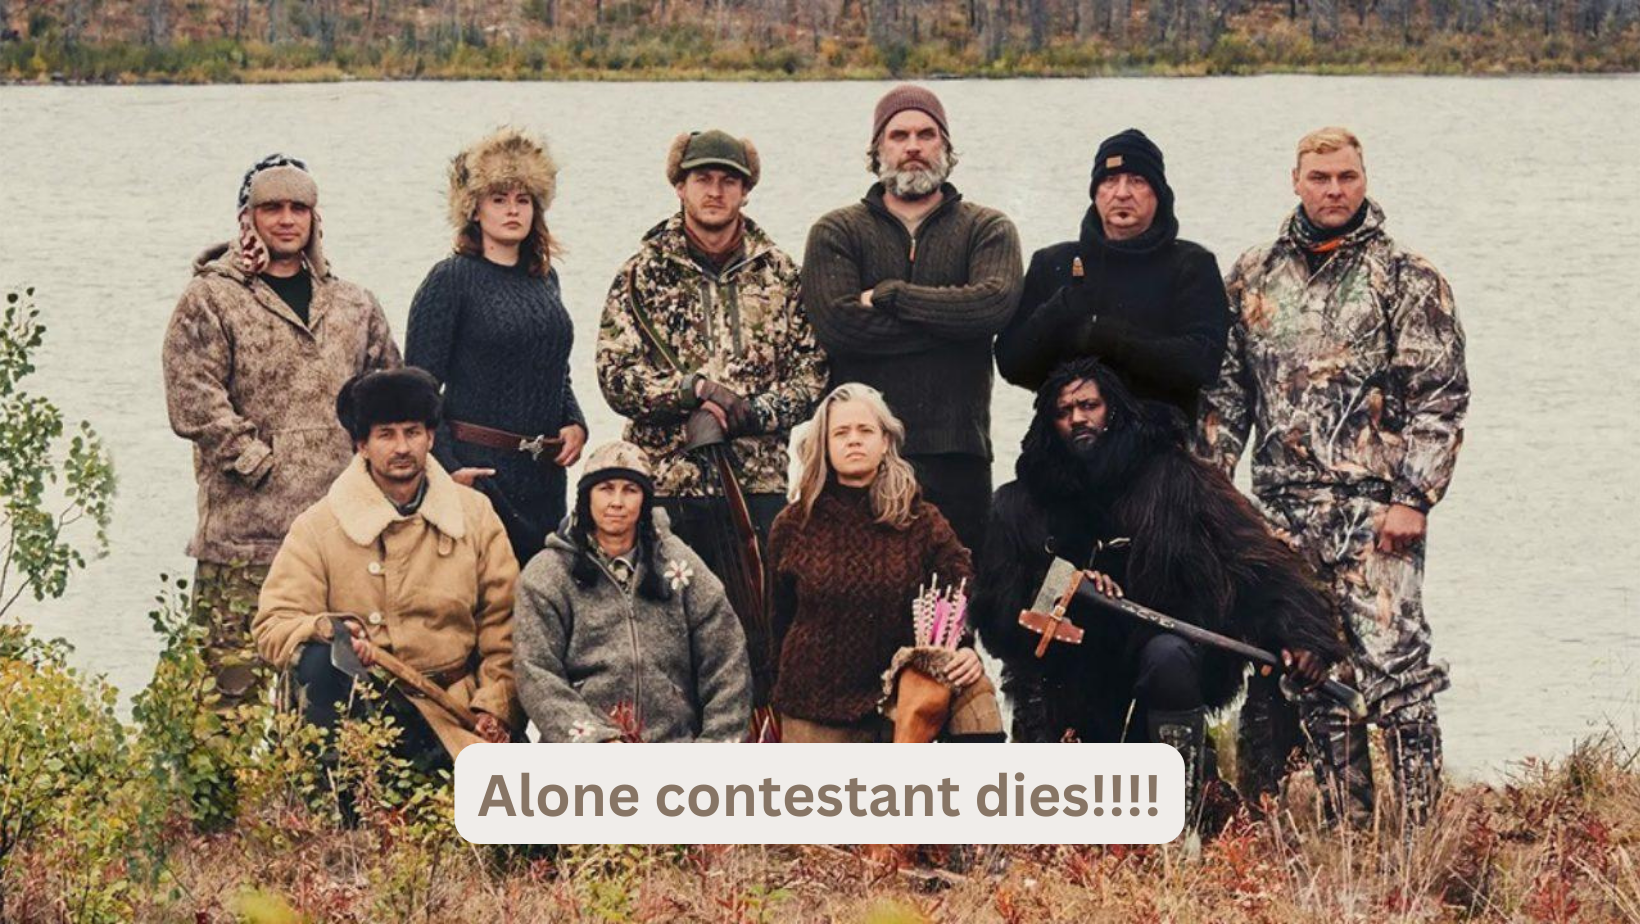 Is the Rumor true about the death of Alone contestant